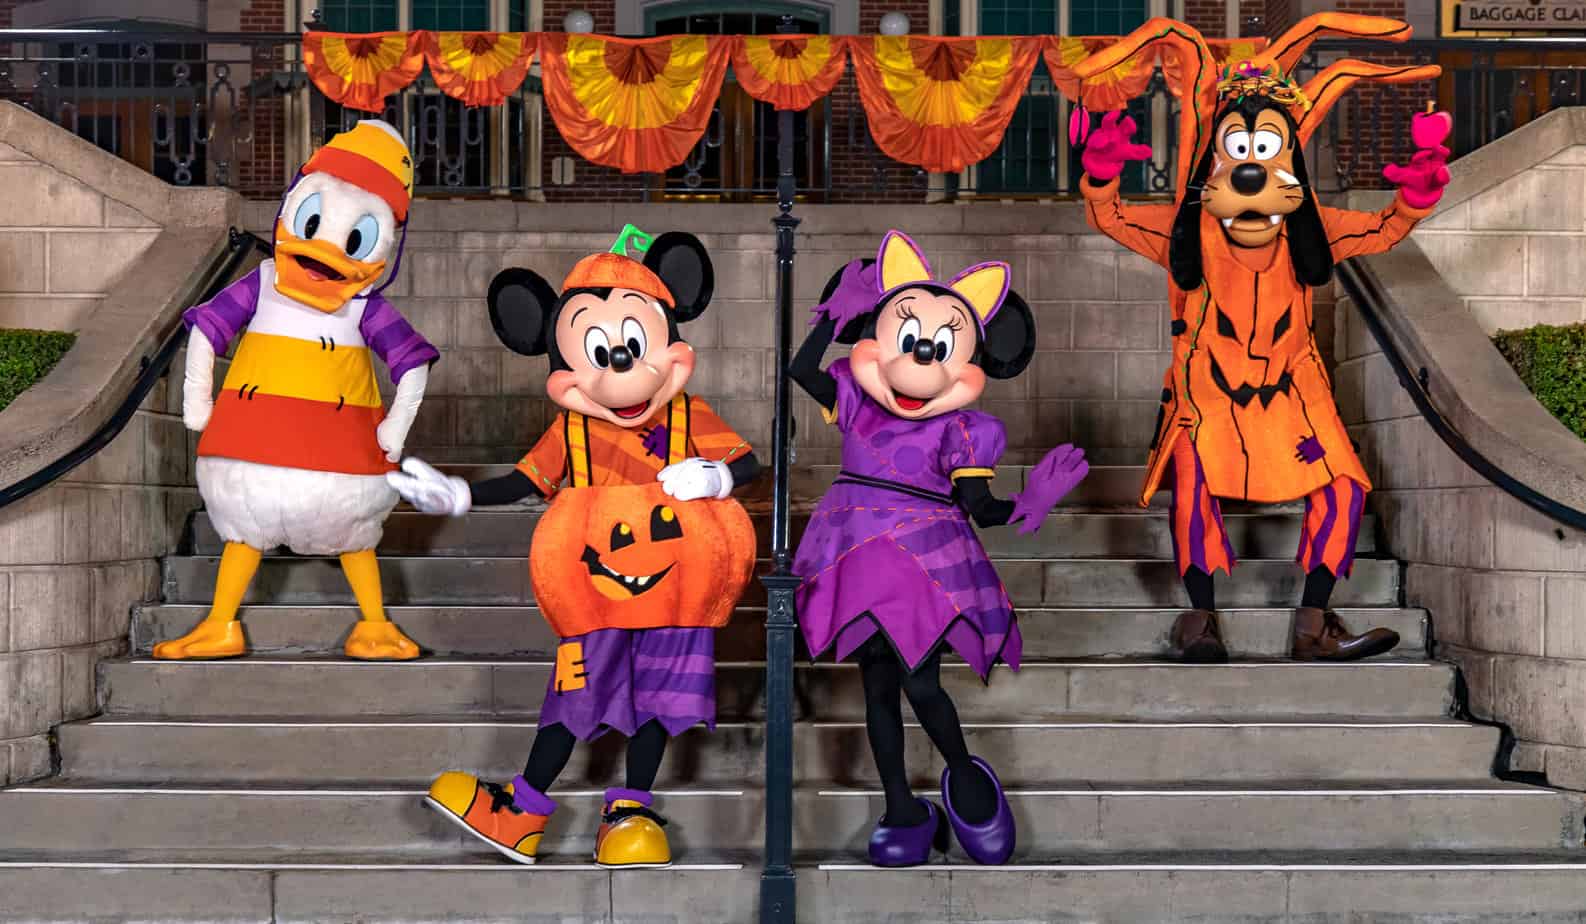 Halloween Time at Disneyland Resort Ñ Mickey Mouse, Minnie Mouse and Pals Debut New Halloween Attire.